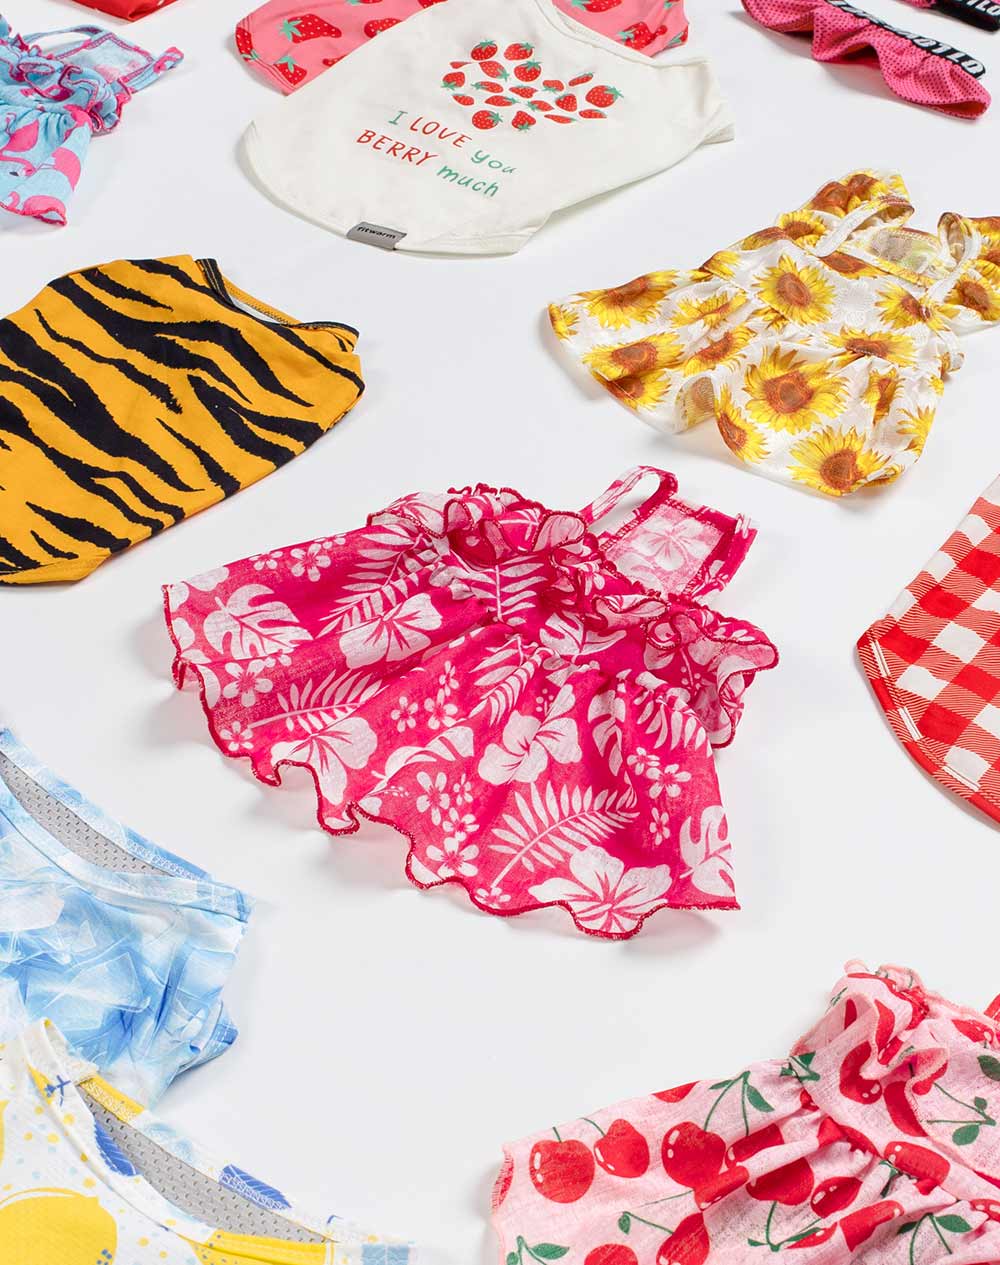 Variety of summer dog clothes spread out, featuring designs like tiger stripes, tropical pink, sunflowers, gingham checks, and tie-dye.